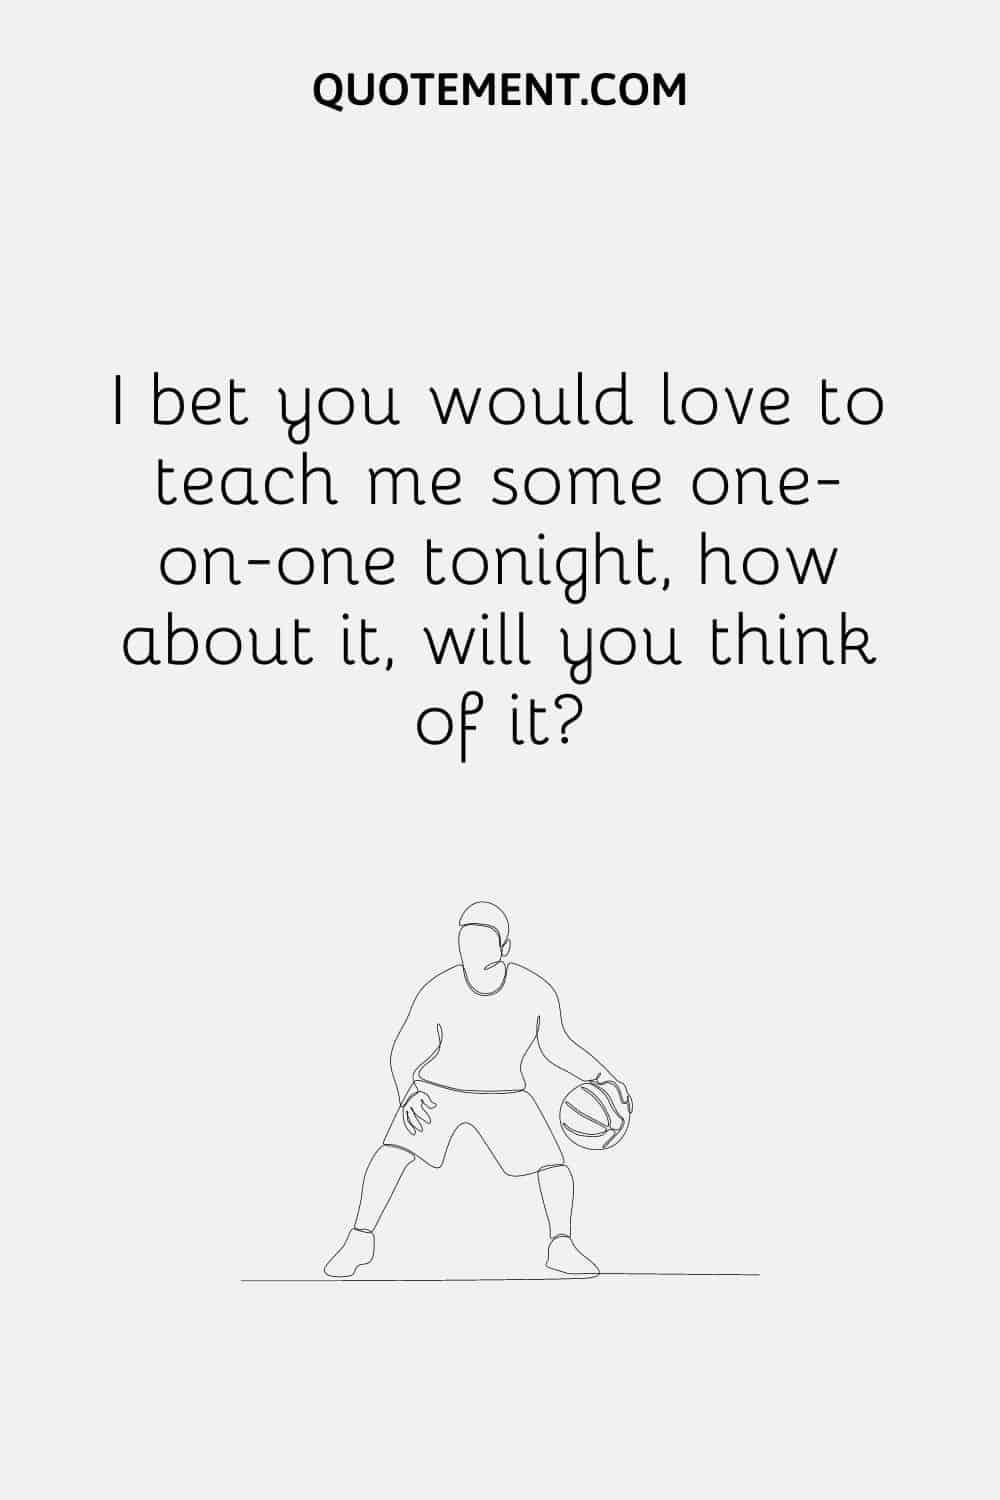 I bet you would love to teach me some one-on-one tonight, how about it, will you think of it